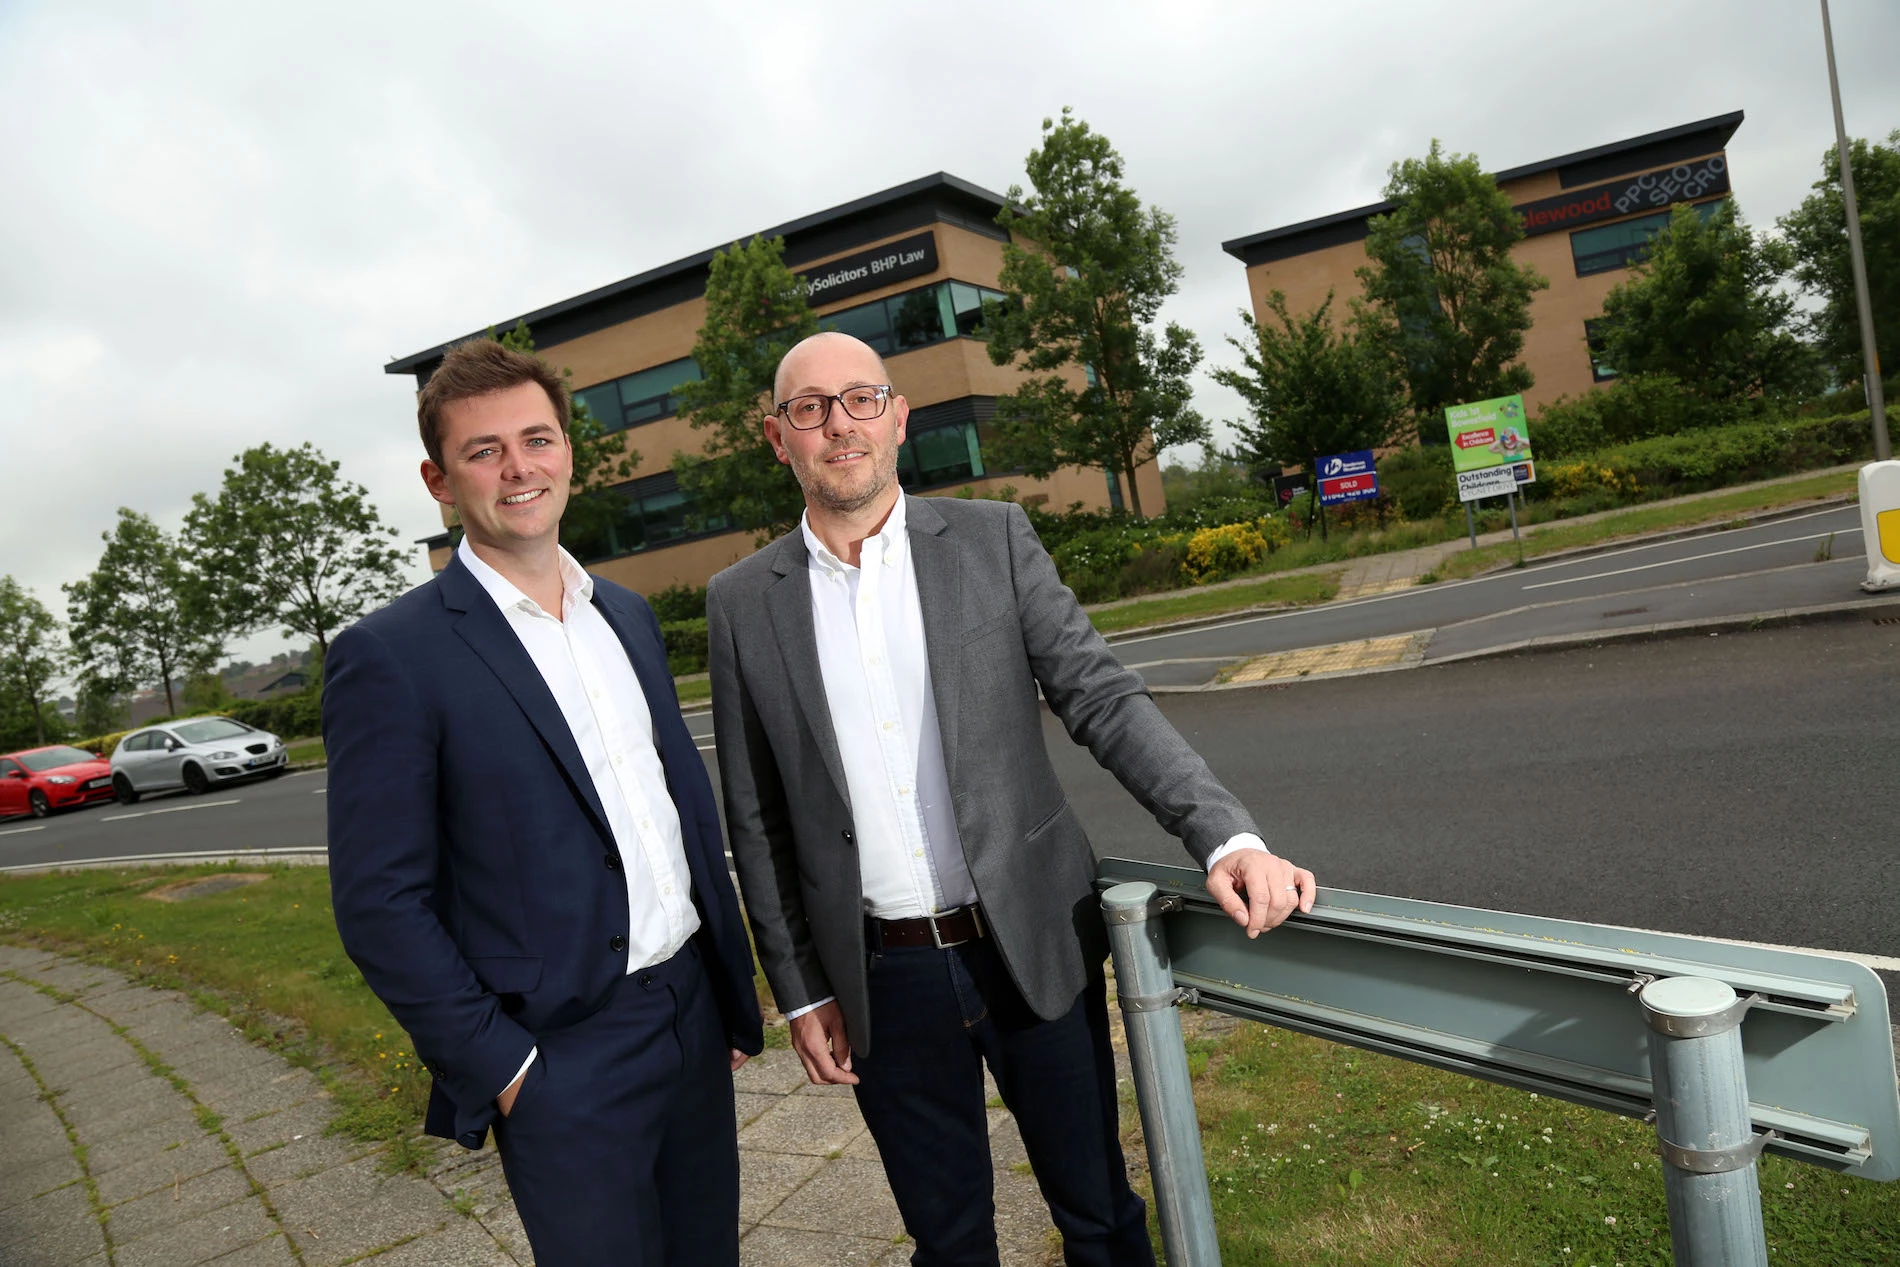 George Williams, Agent at Sanderson Weatherall and Paul Davison, Director at Erimus Insurance